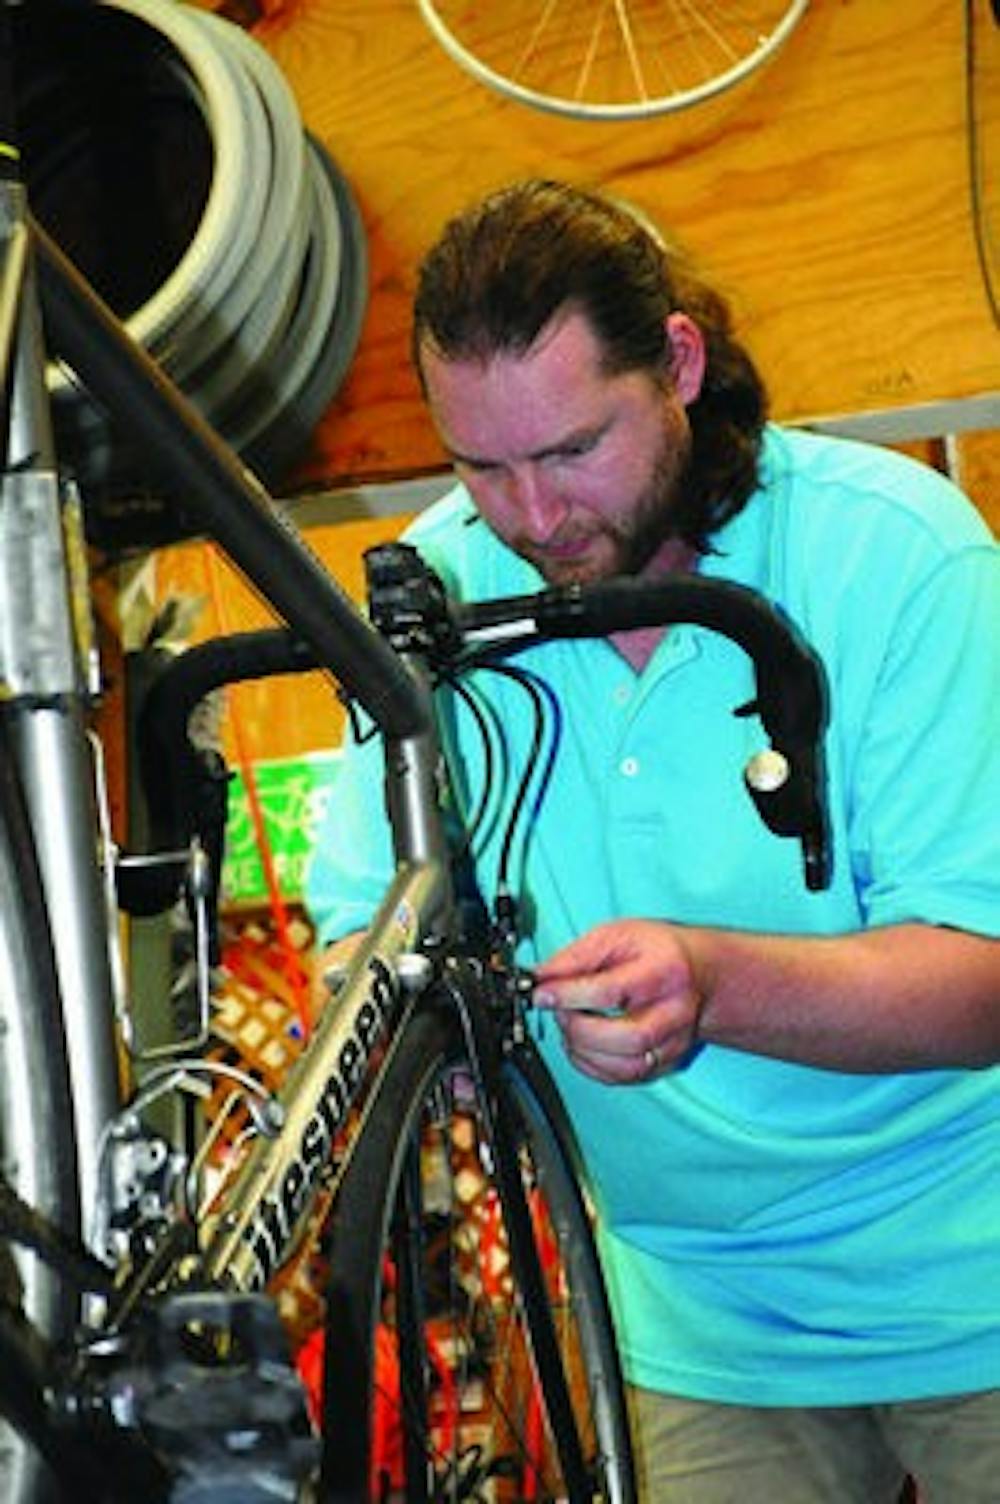 Daniel Trouse, manager of The Bike Shop, works on one of the bikes in the store. (Christen Harned / ASSISTANT PHOTO EDITOR)